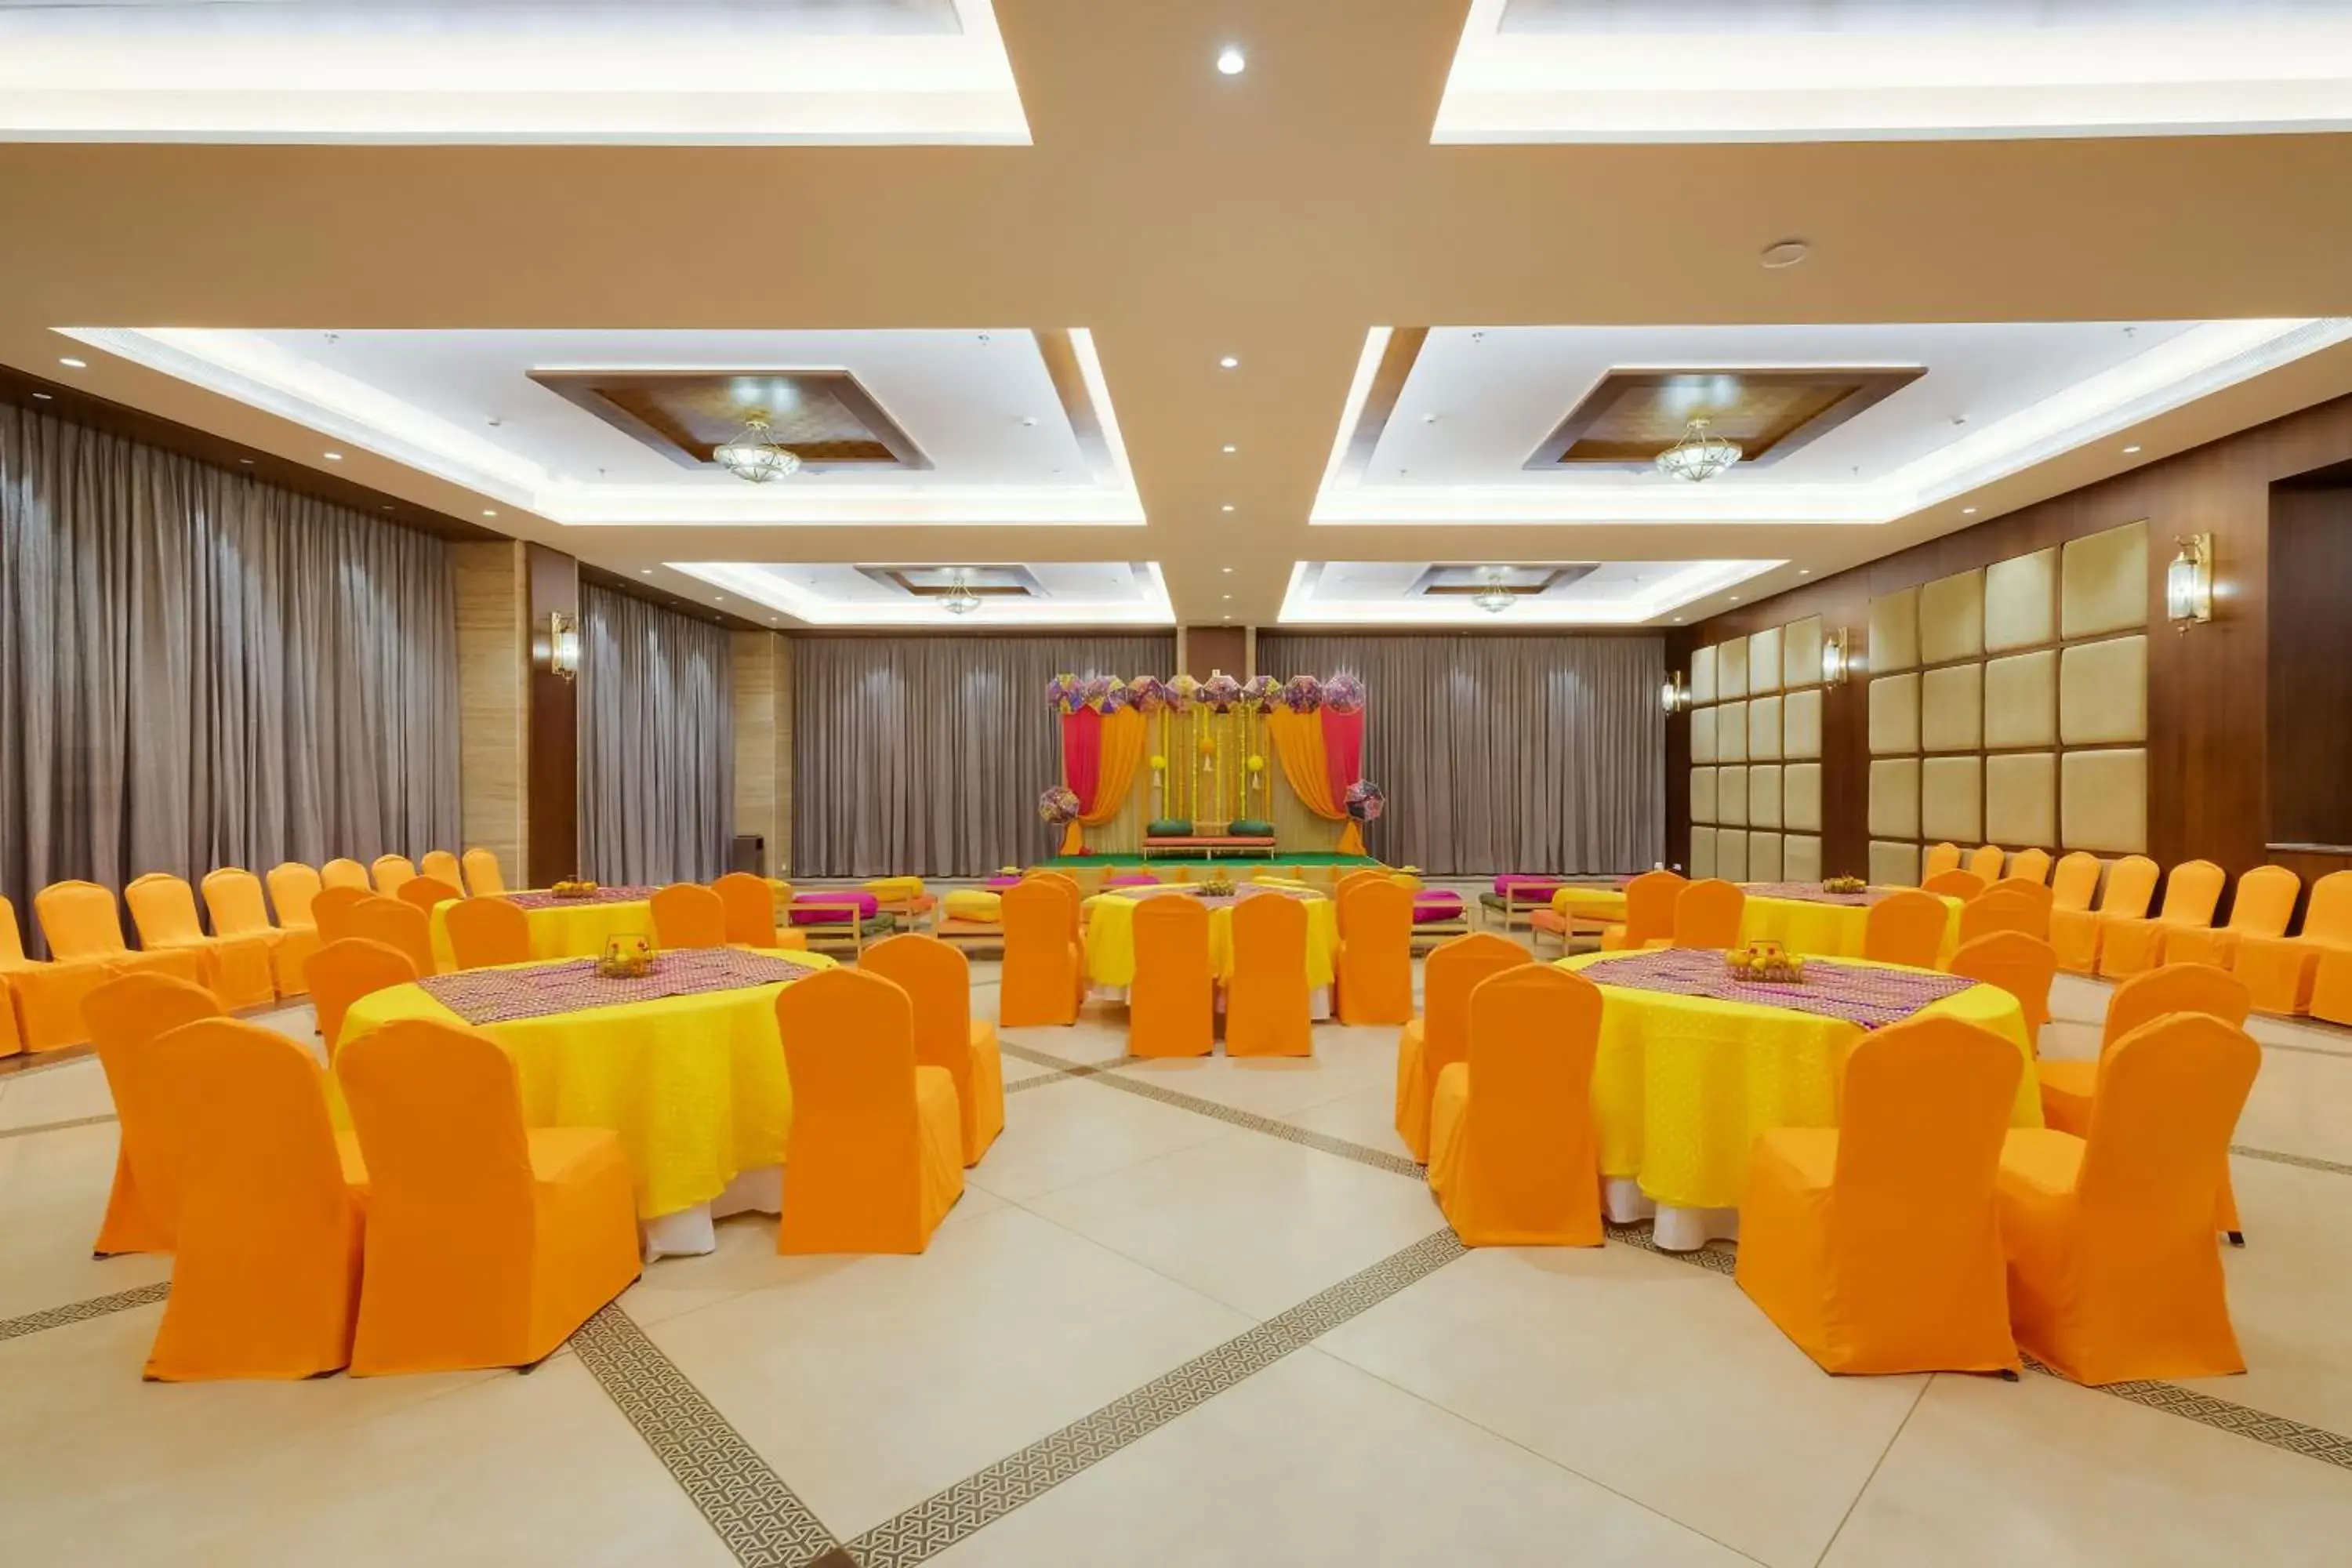 Banquet/Function facilities, Banquet Facilities in The Fern An Ecotel Hotel, Lonavala